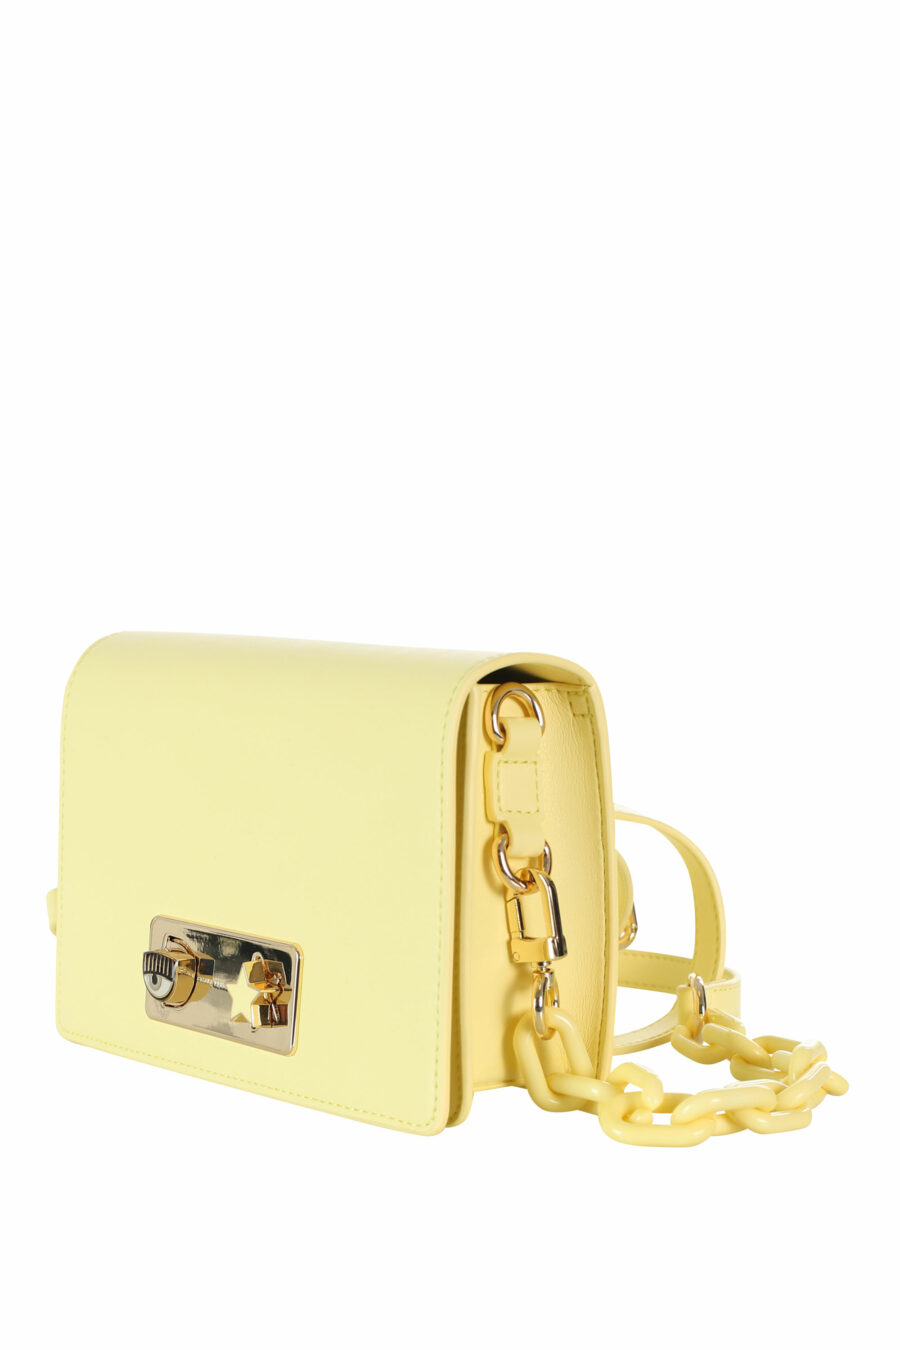 Yellow shoulder bag with eye lock and metal star - 8052672351906 2